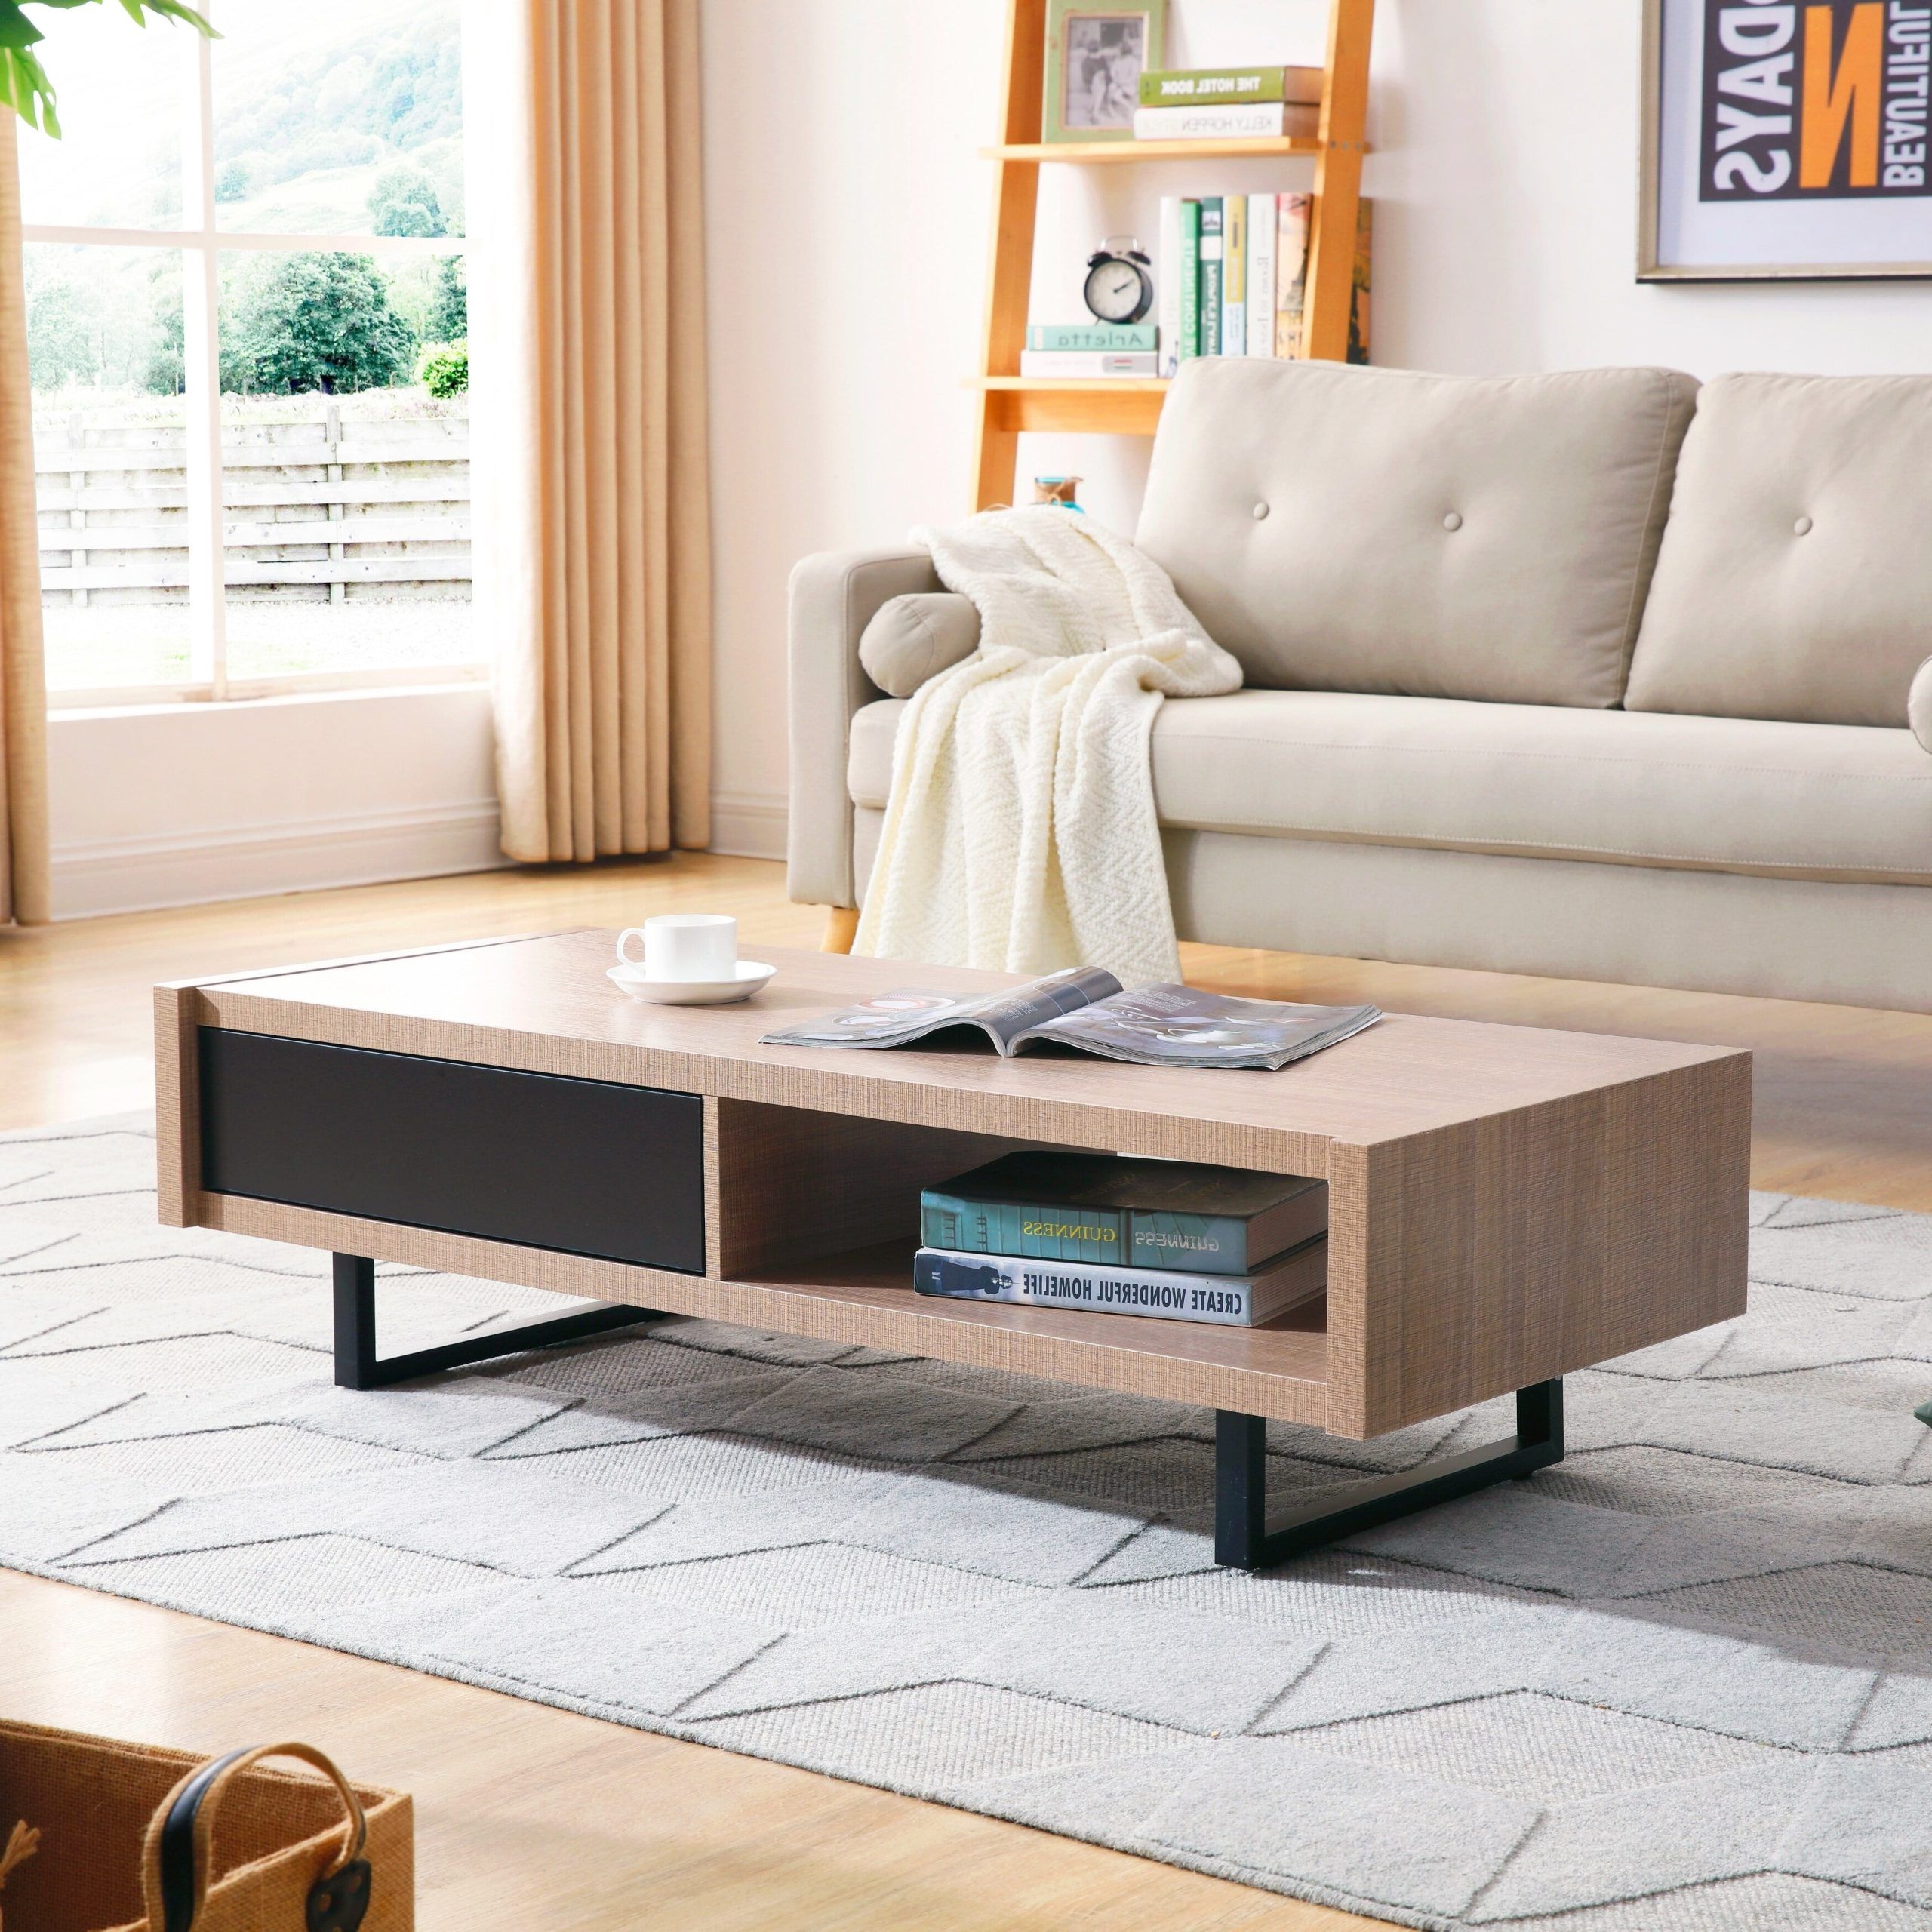 Mid Century Modern Ash Living Room Coffee Table, Tan – Walmart With Regard To Mid Century Modern Coffee Tables (Gallery 16 of 20)